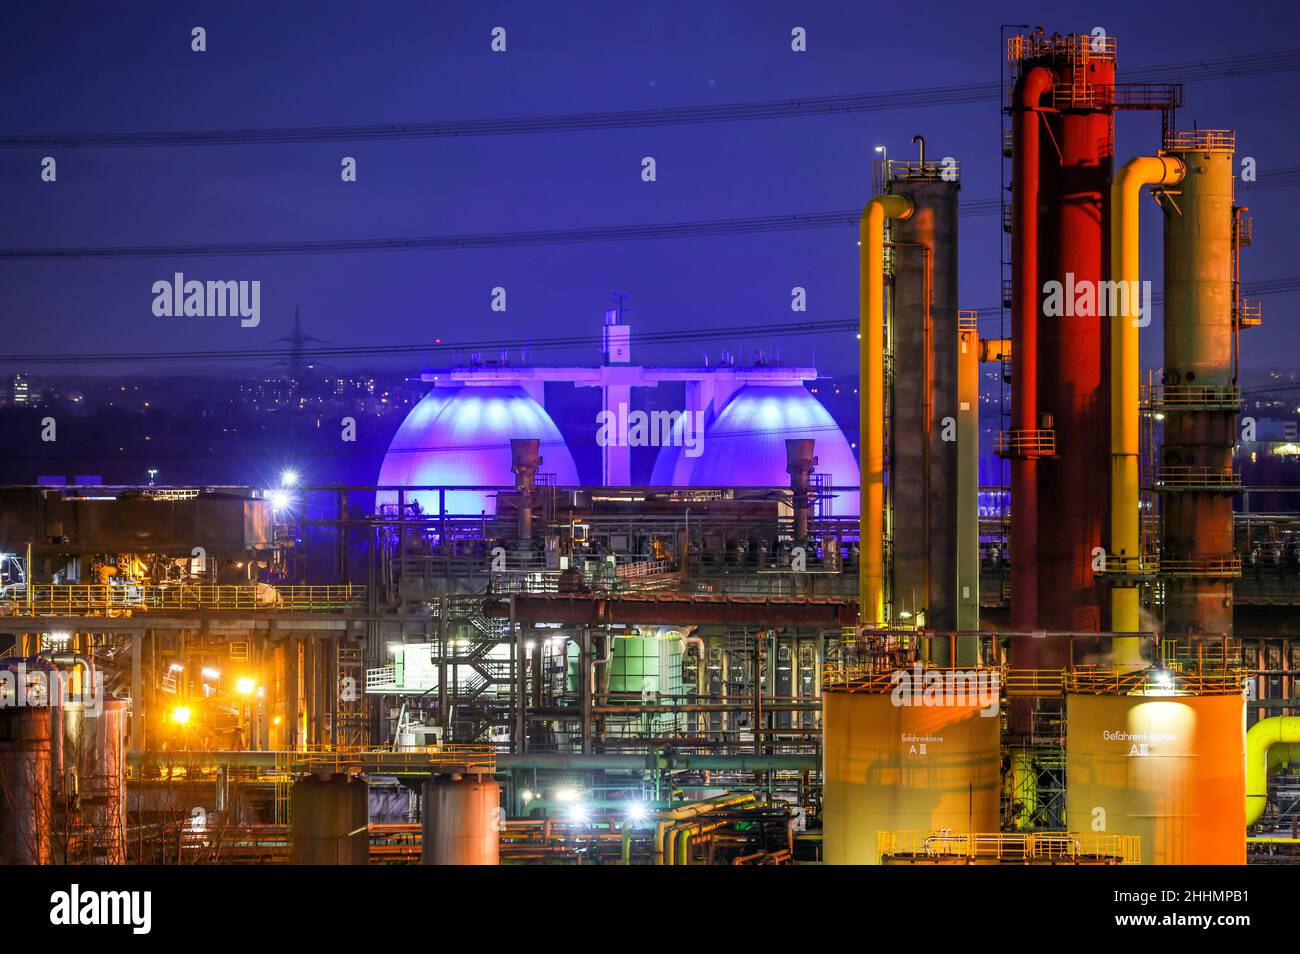 Bottrop, North Rhine-Westphalia, Germany - The Prosper coking plant is one of the three operating coking plants in the Ruhr area. The Prosper coking p Stock Photo